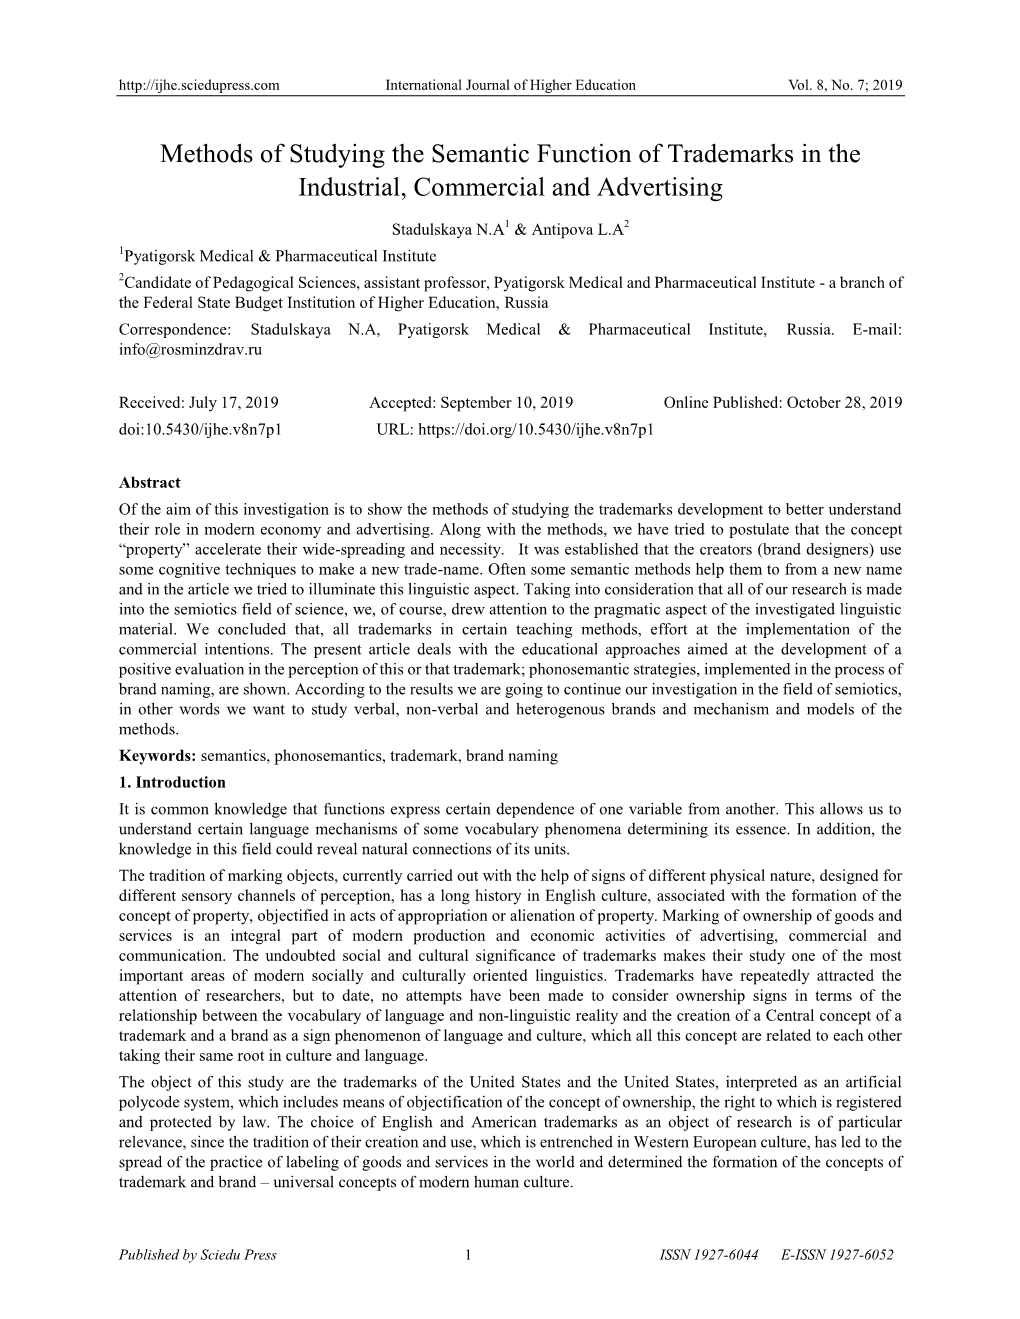 Methods of Studying the Semantic Function of Trademarks in the Industrial, Commercial and Advertising